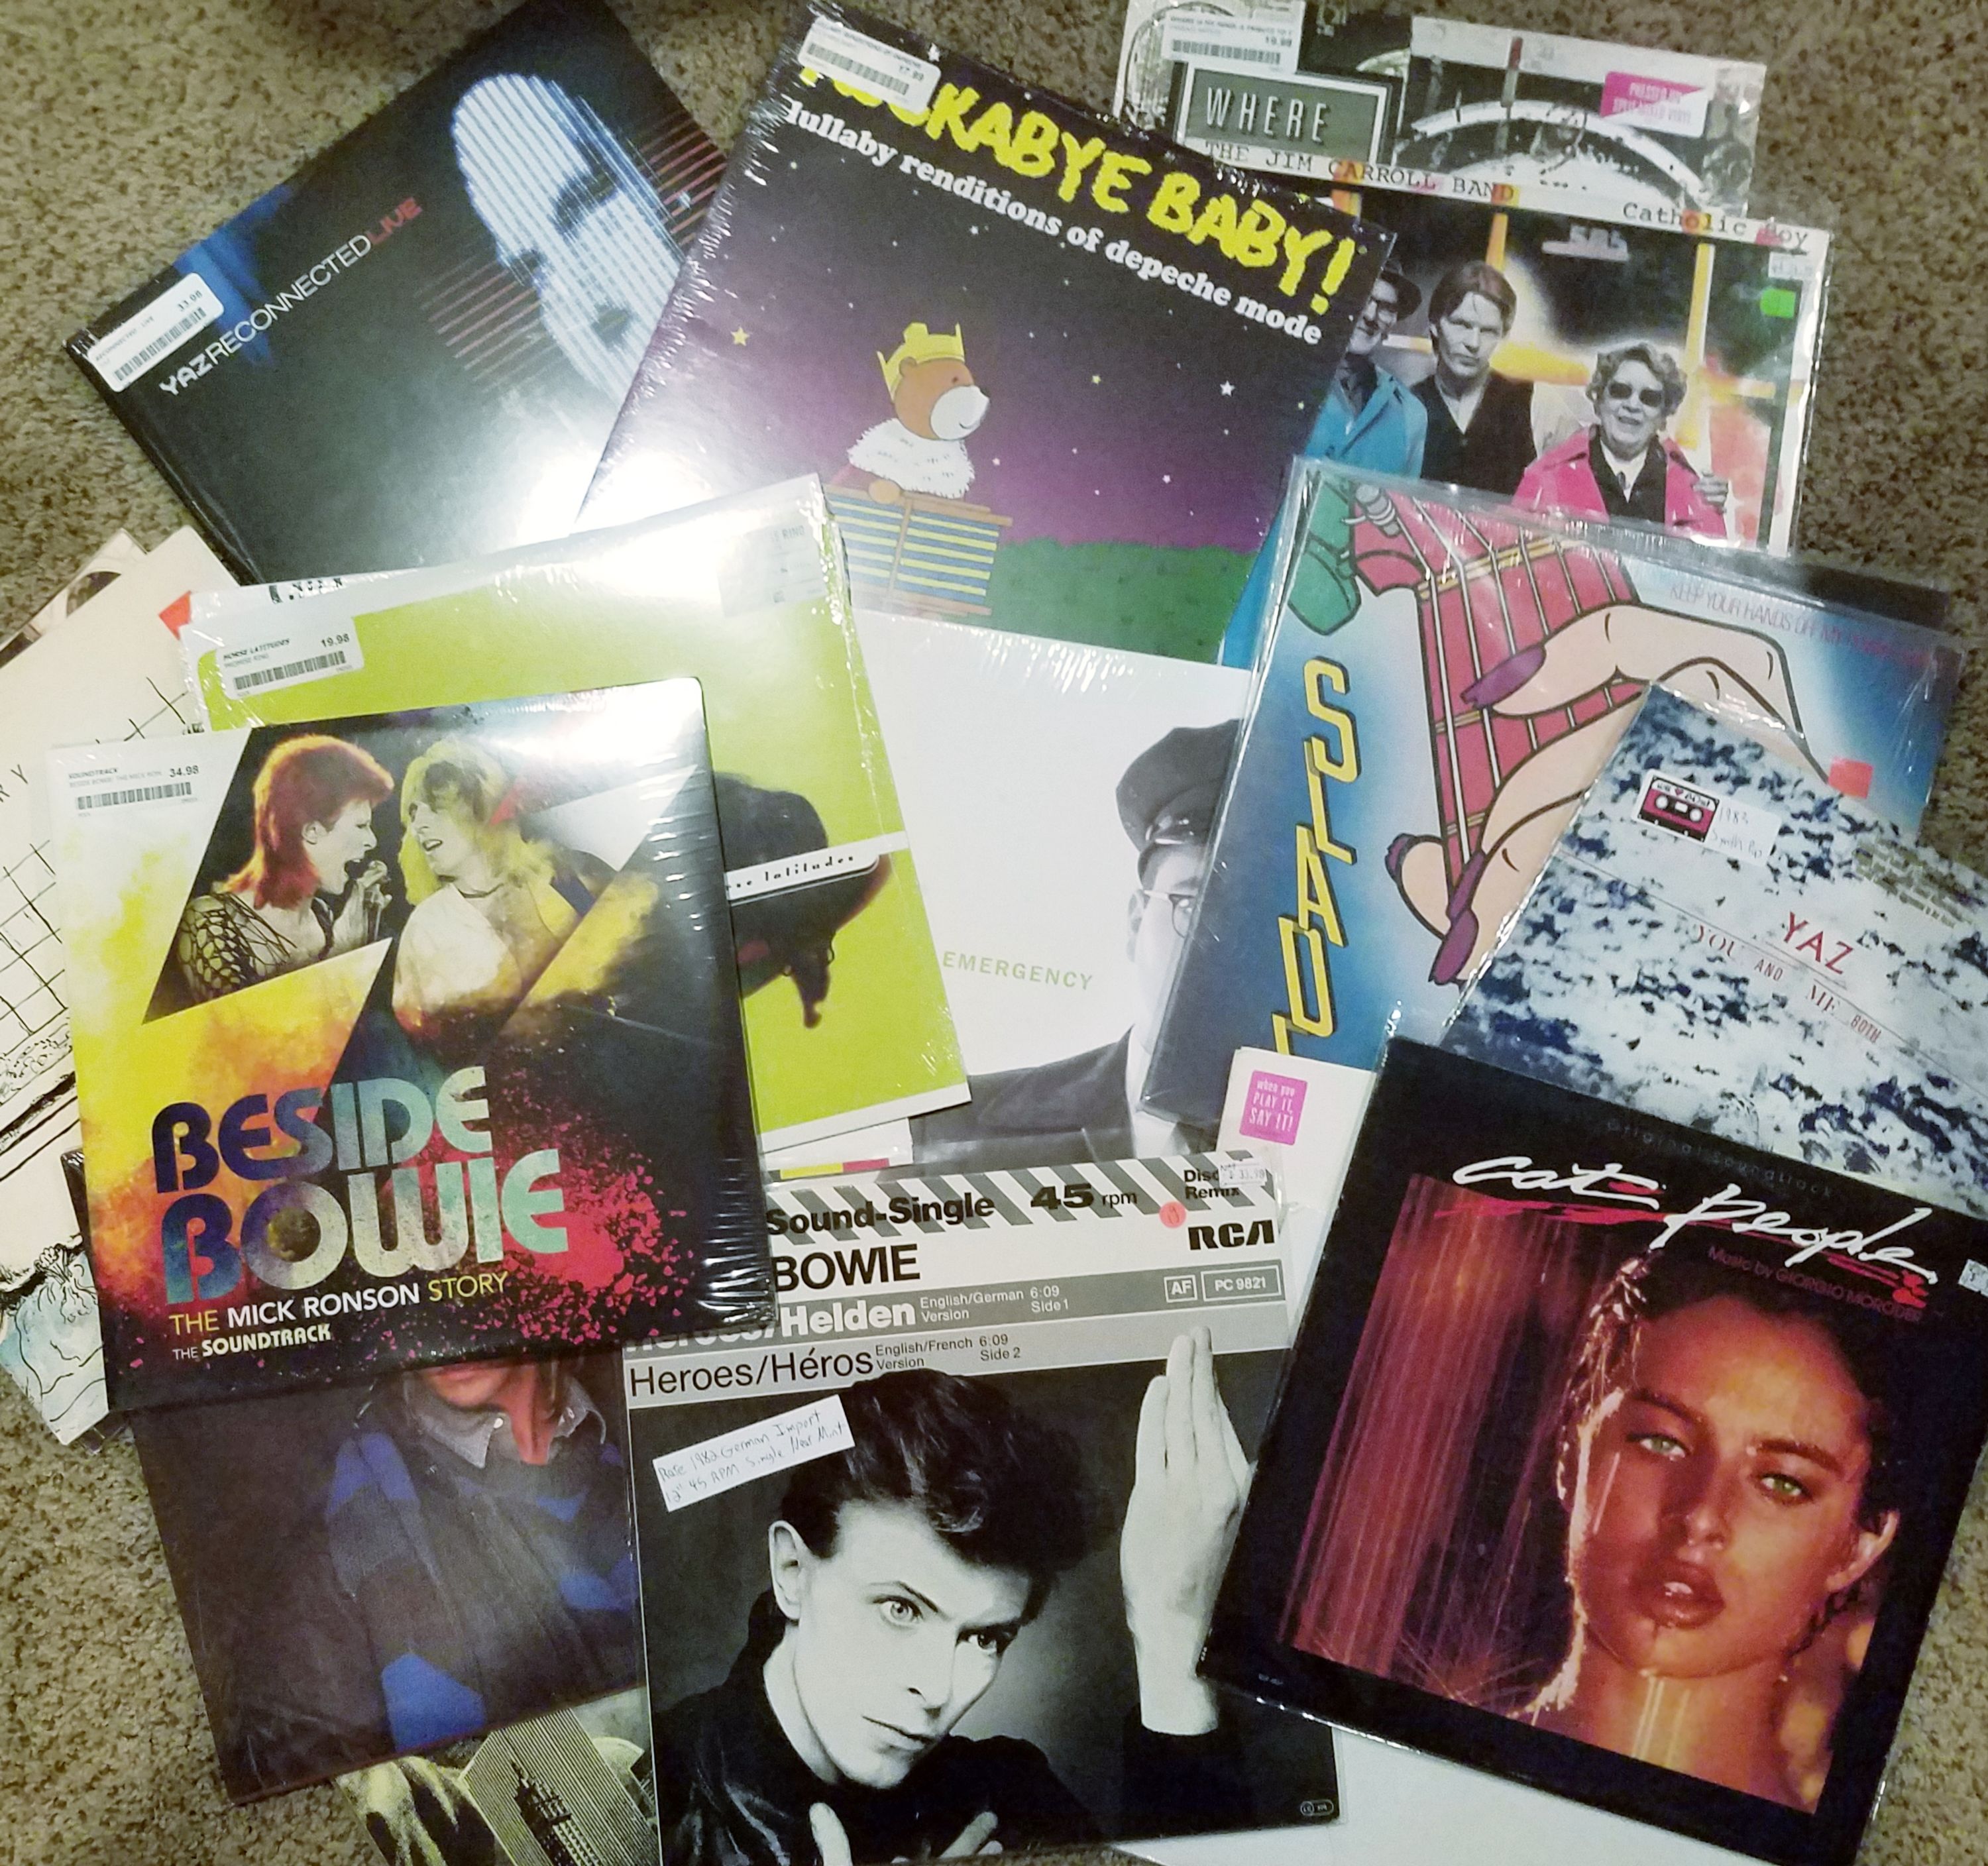 various vinyl records purchased at Dimple